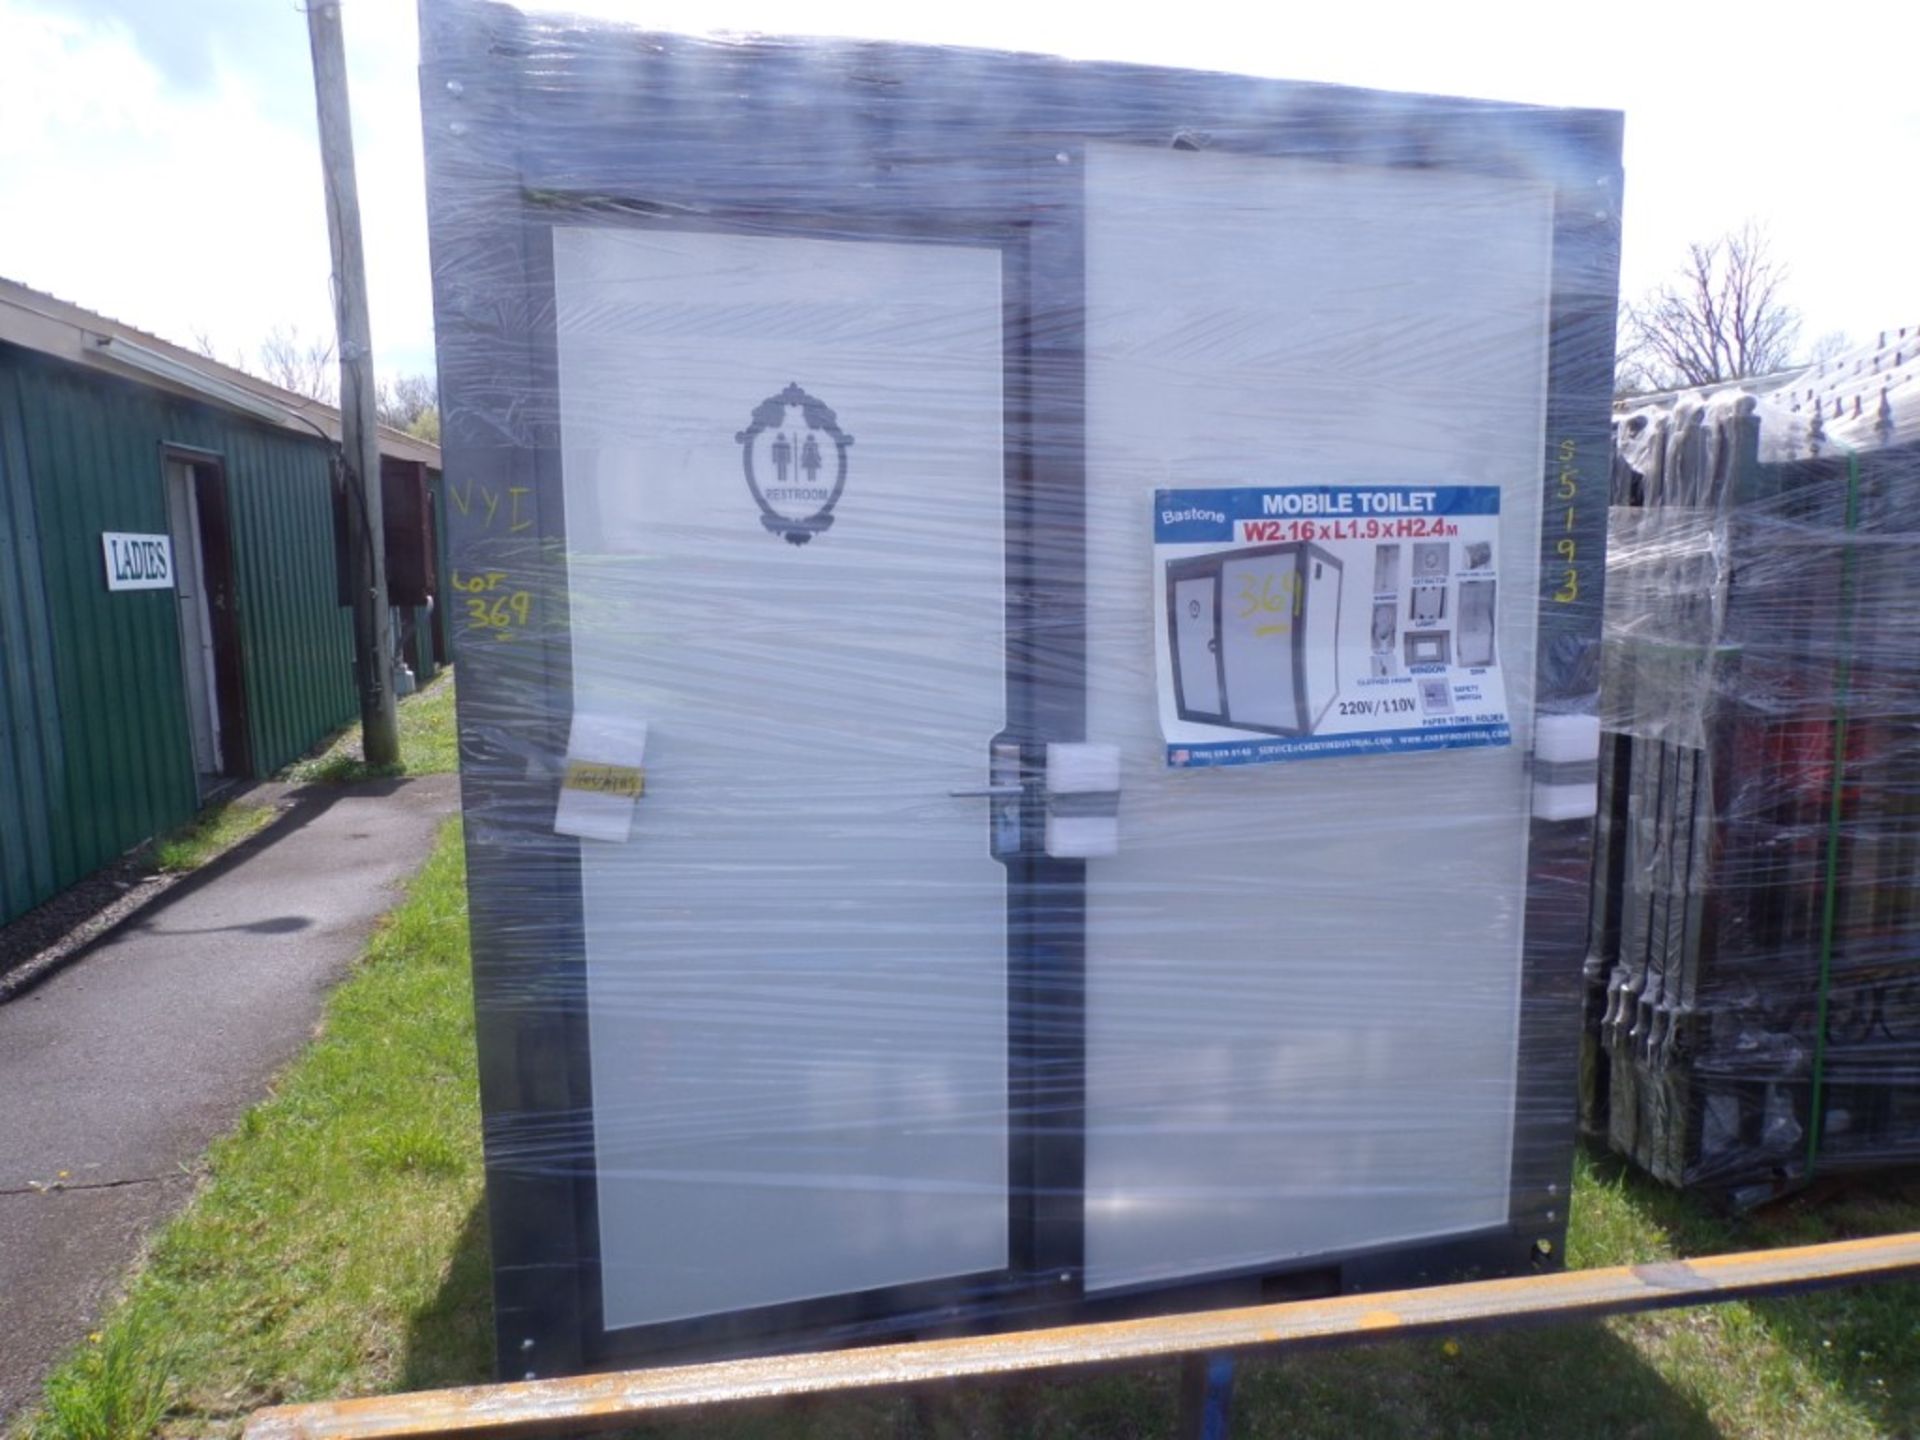 New Bastone Portable Toilet, Full Bathroom, Shower, Sink, Light, Requires Electric and Sewer Hook Up